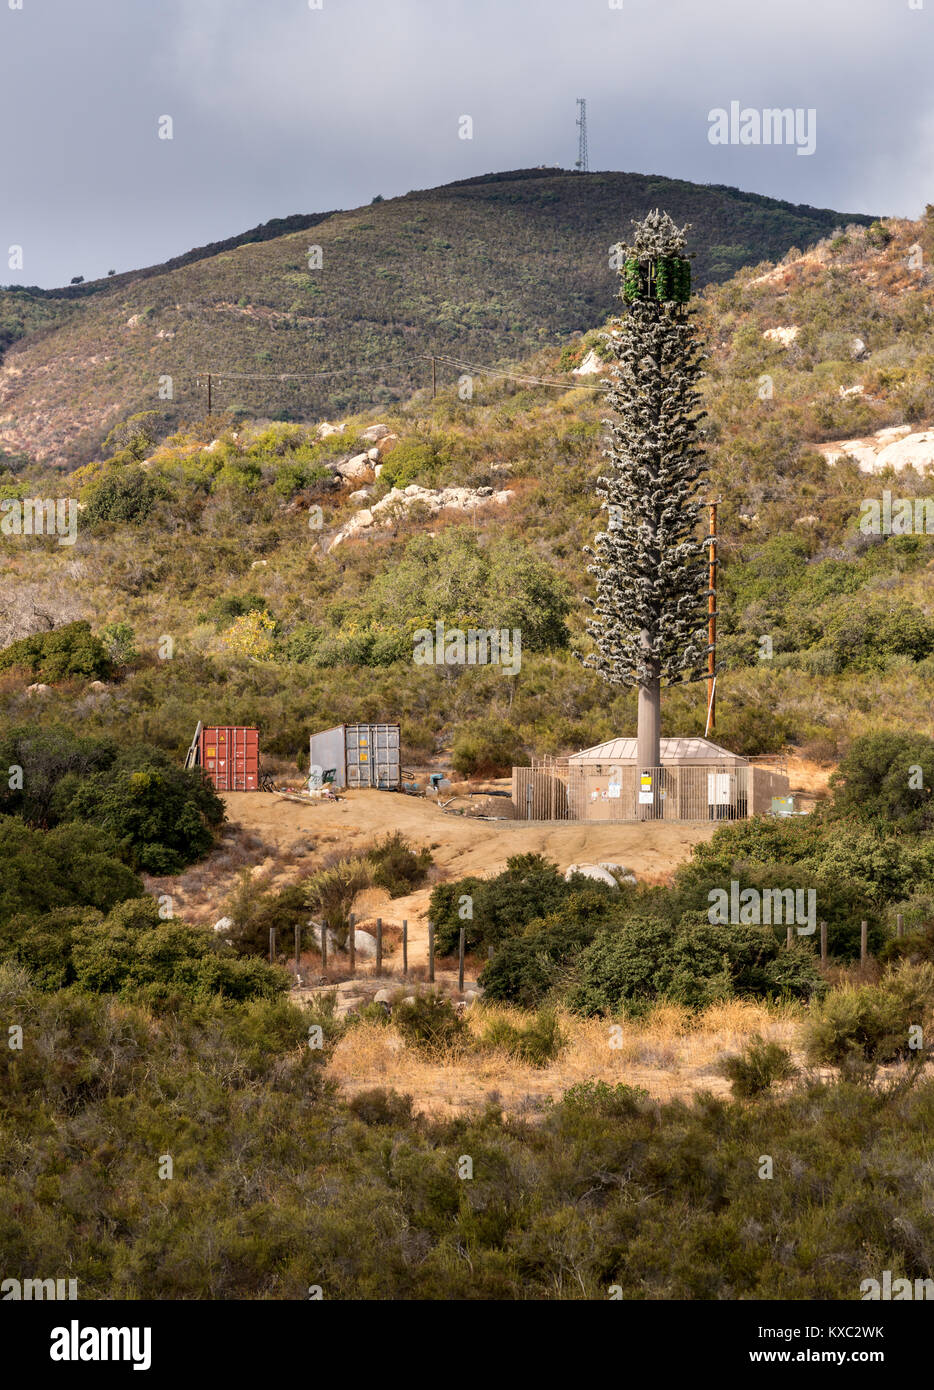 Cellphone mobile transmission tower disguised as a fir tree in California Stock Photo